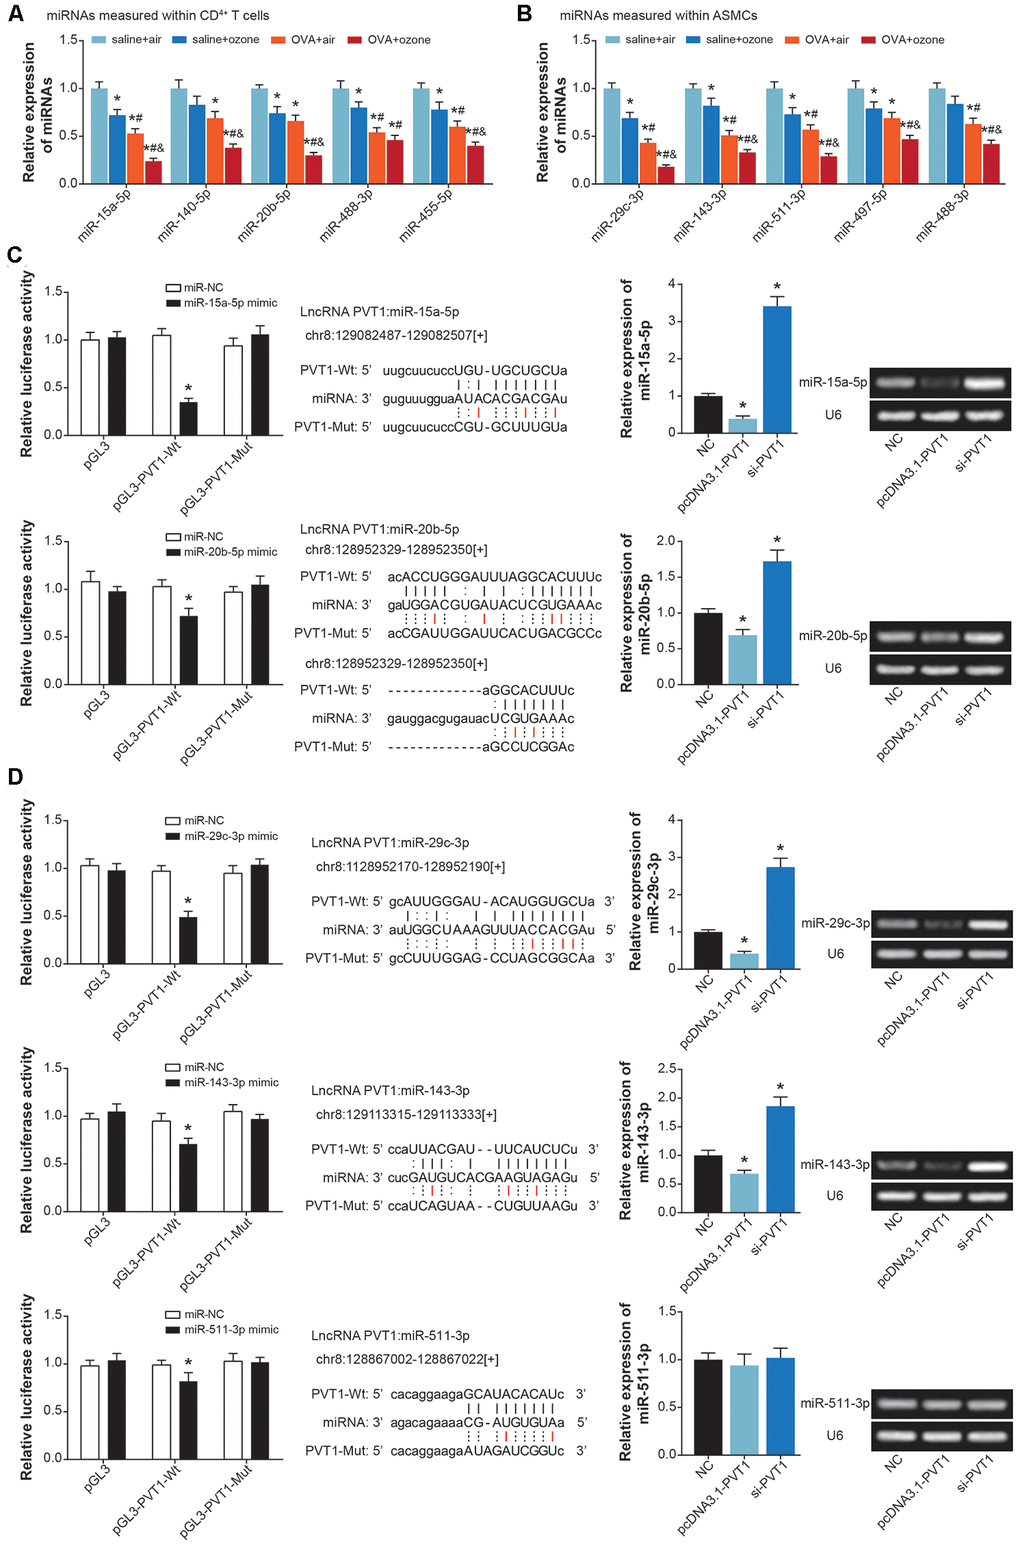 MiRNAs potentially sponged by lncRNA PVT1 within ASMCs and CD4+ T cells. (A) MiR-15a-5p, miR-140-5p, miR-20b-5p, miR-488-3p and miR-455-5p were differentially expressed within CD4+ T cells of saline+air, saline+ozone, OVA+air and OVA+ozone groups. *: PPPB) Expressions of miR-29c-3p, miR-143-3p, miR-511-3p, miR-497-5p and miR-488-3p were evaluated within ASMCs of mice models among saline+air, saline+ozone, OVA+air and OVA+ozone groups. *: PPPC) MiR-15a-5p and miR-20b-5p were sponged and regulated by lncRNA PVT1 in CD4+ T cells. (D) MiR-29c-3p, miR-143-3p and miR-511-3p were subjected to sponged modulation by lncRNA PVT1 in ASMCs.